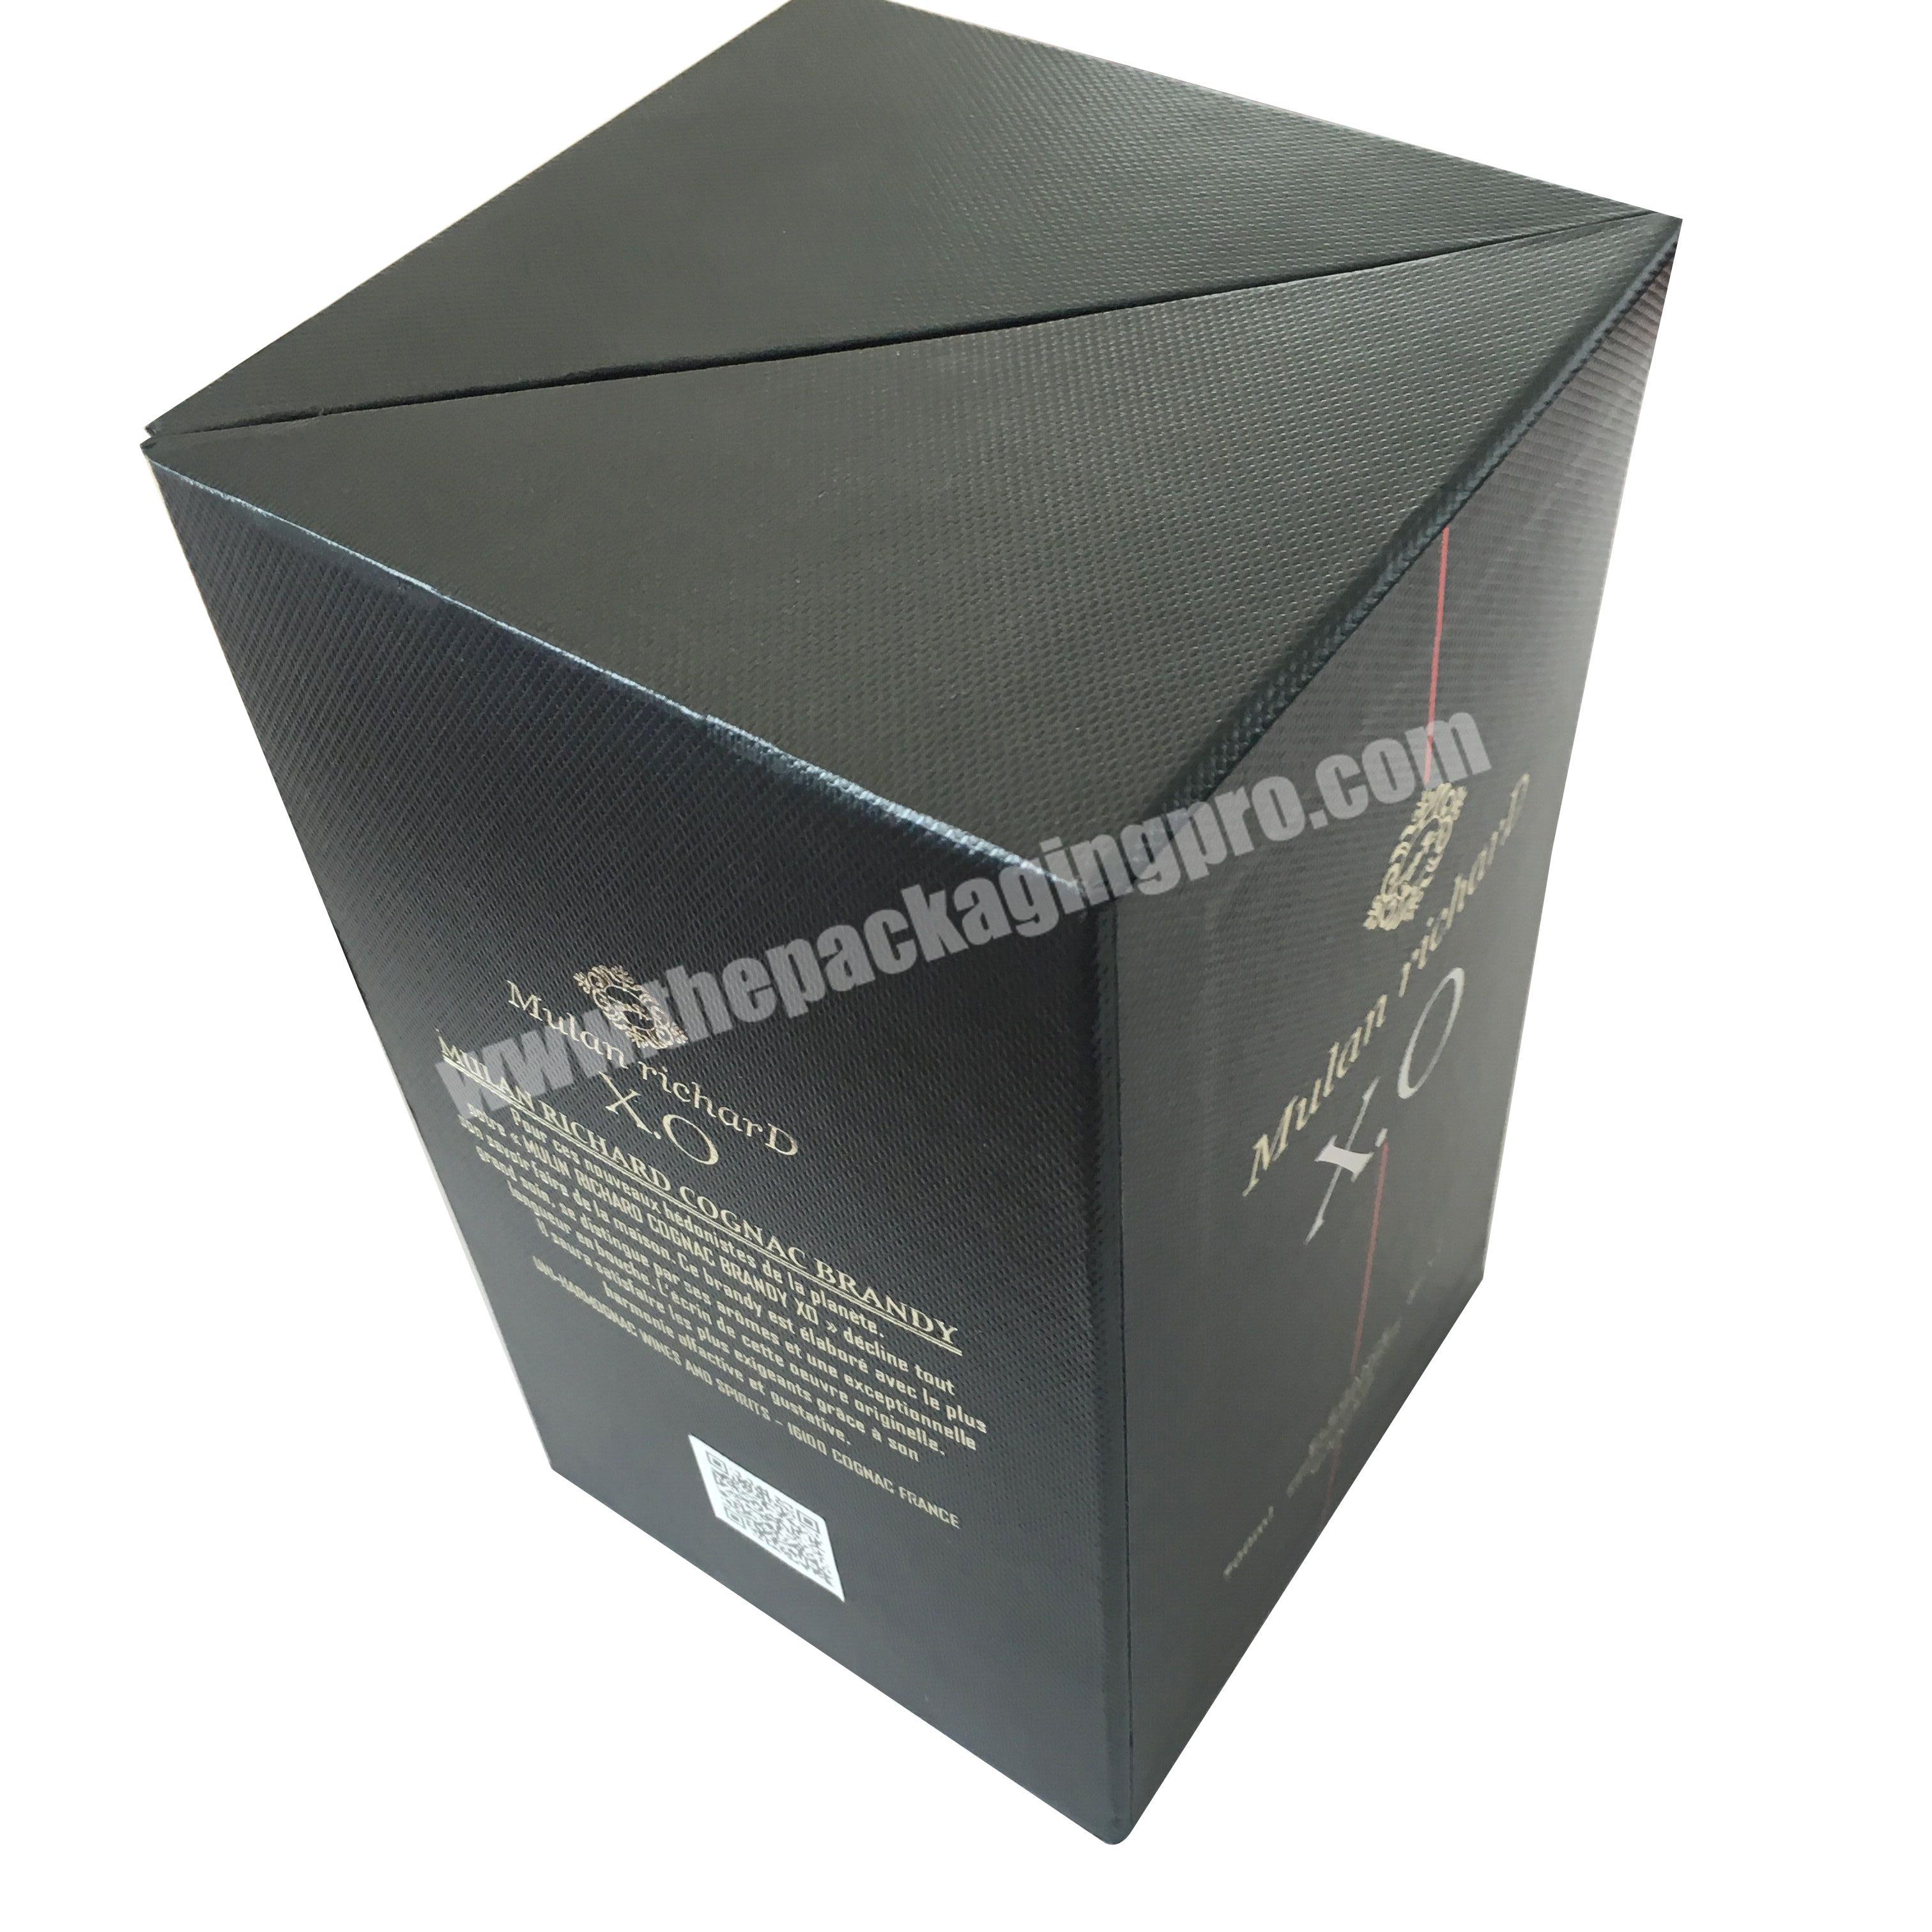 personalize Exquisite gift packaging custom design high end wine box